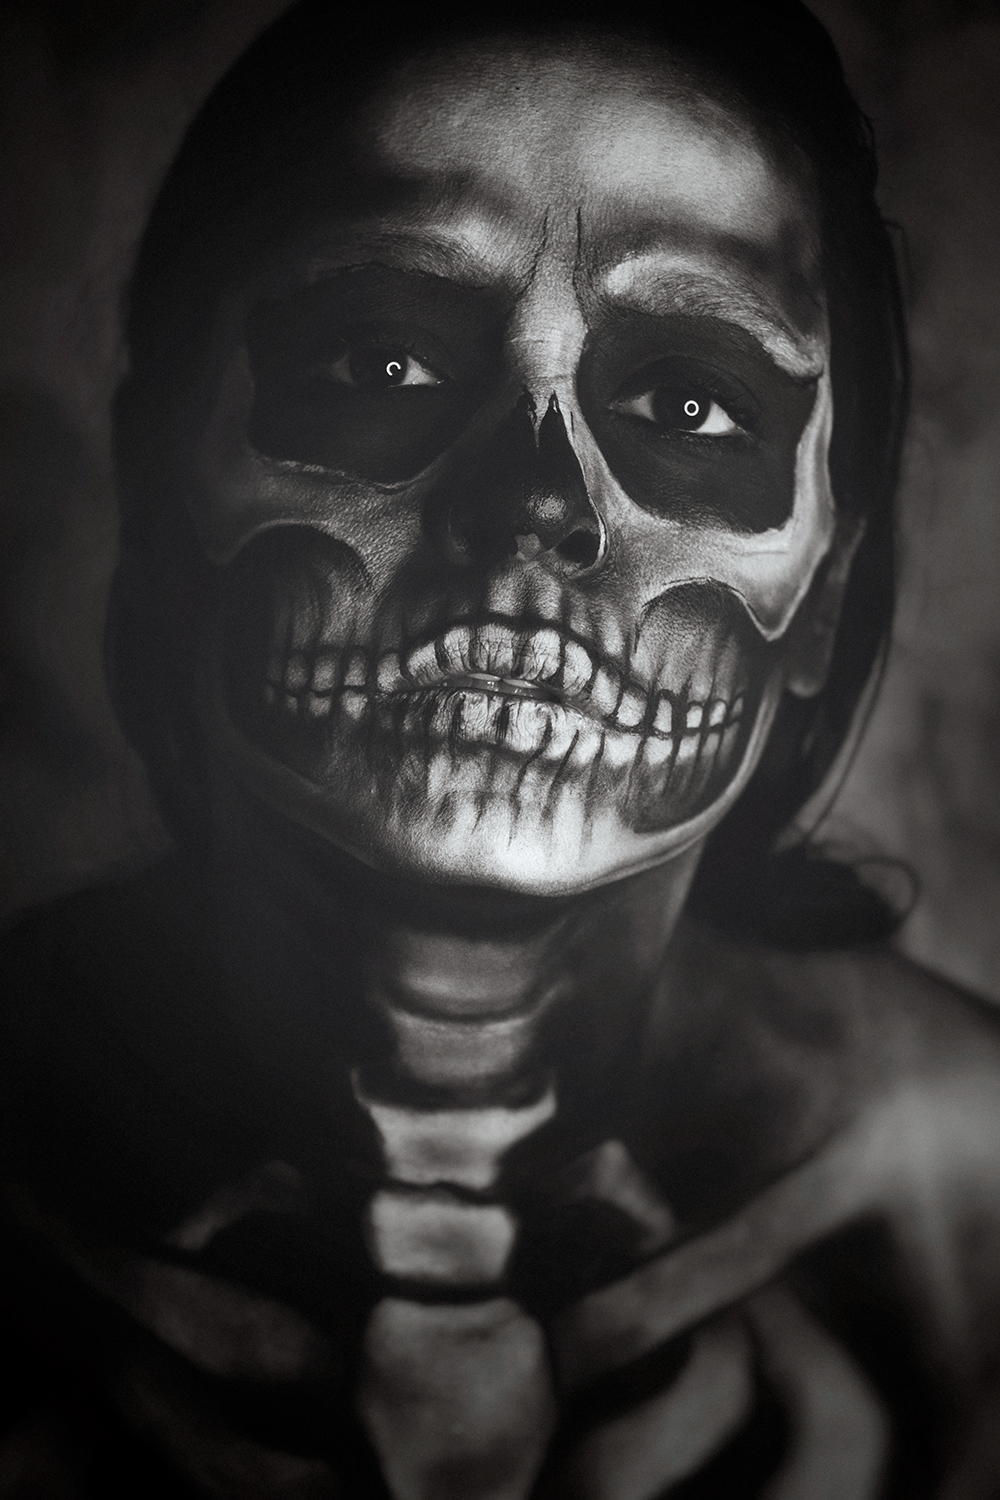 BLACK AND WHITE PHOTOGRAPHY, BLACK AND WHITE PORTRAIT PHOTOGRAPHY, BLACK AND WHITE SKULL FACE PHOTOGRAPHY, REALISTIC SKULL FACE PHOTOGRAPHY